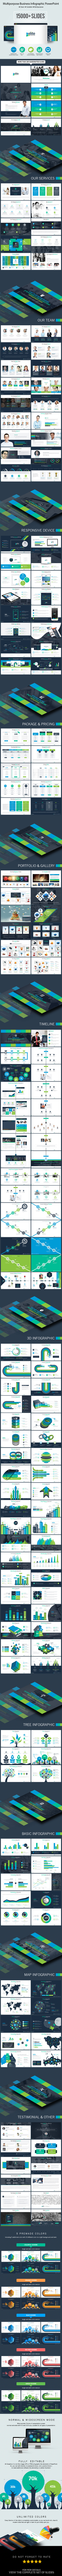 Multipurpose 20business 20gr 20graphicriver 20powerpoint 20keynote 20project 20presentation image 20preview